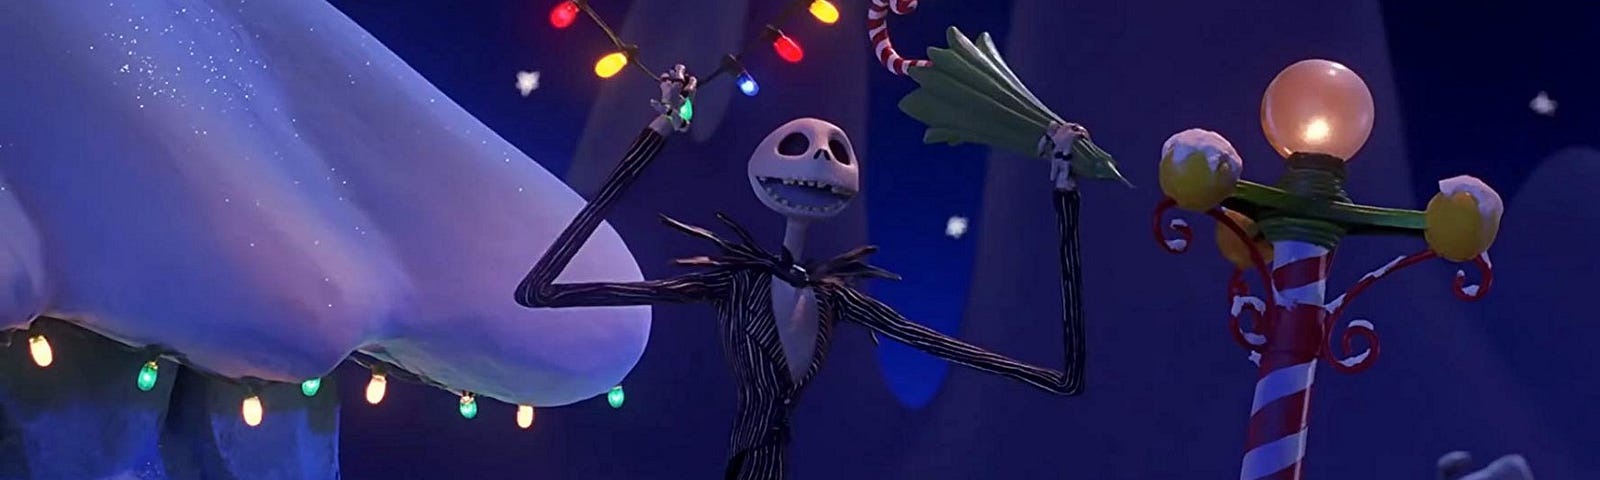 A dapper skeleton in a pinstripe suit and bow tie sings around Christmas decorations.